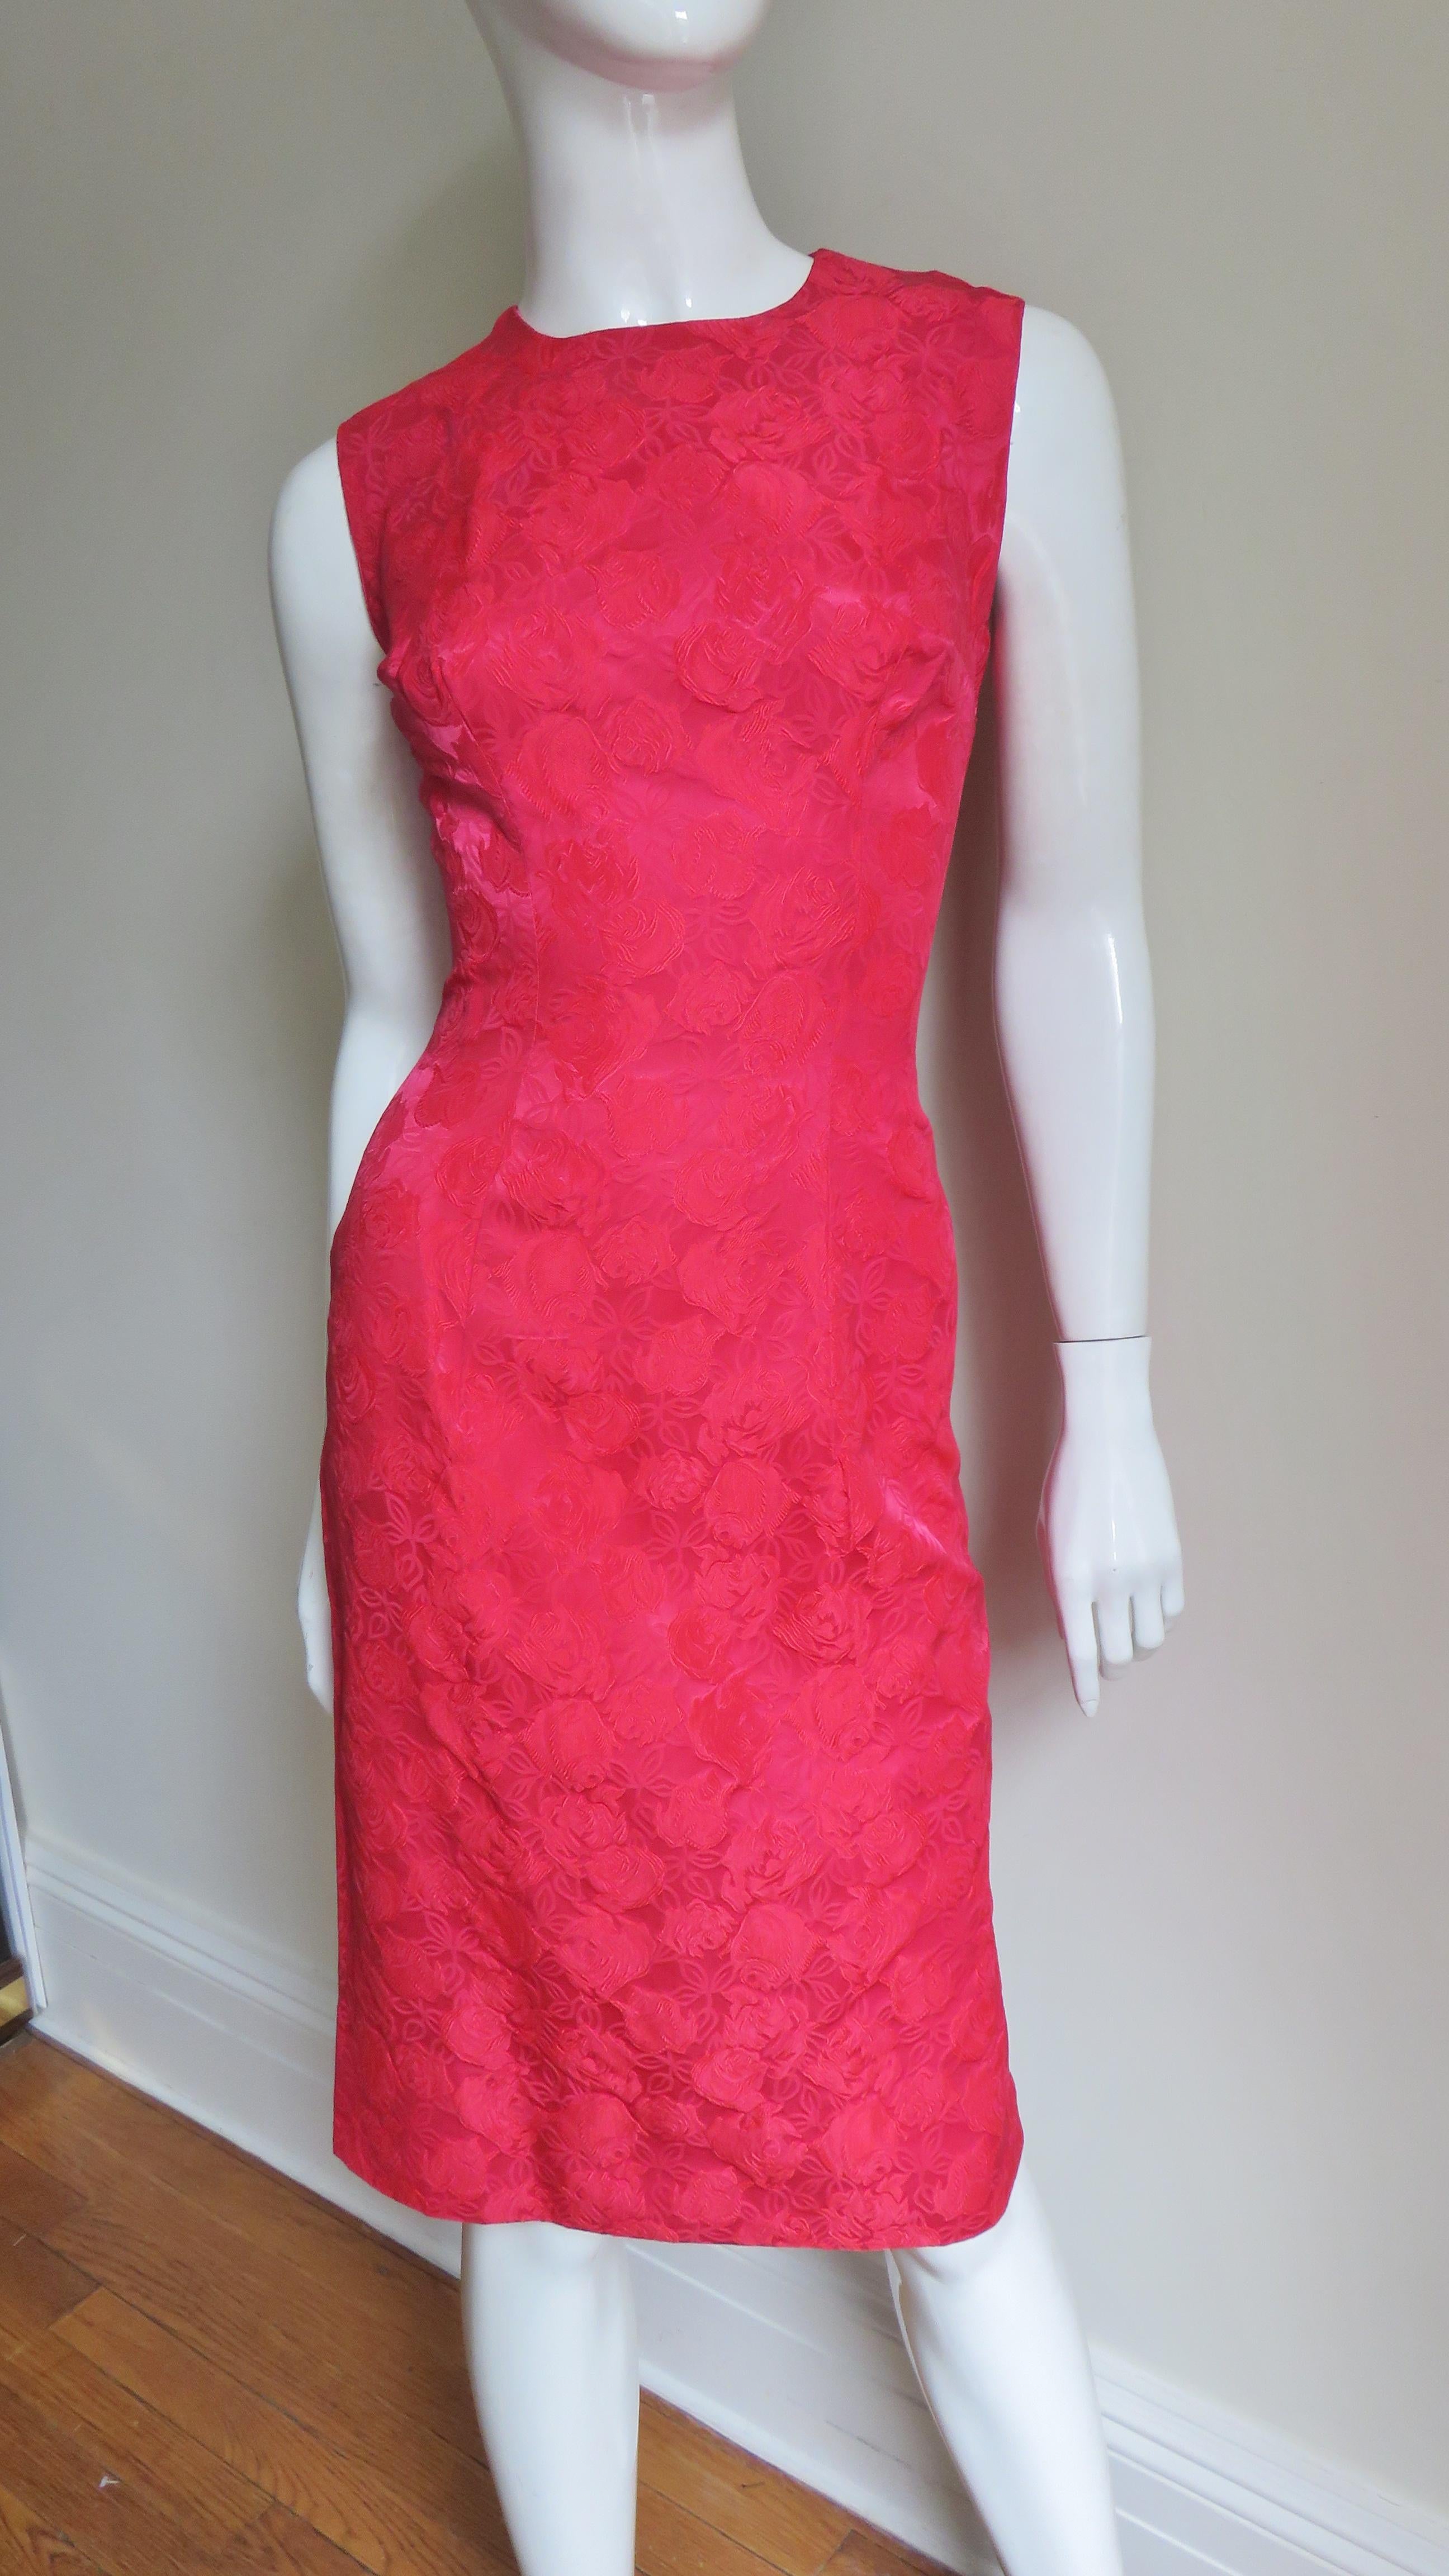 Red Suzy Perette New Damask Dress and Overdress 1950s